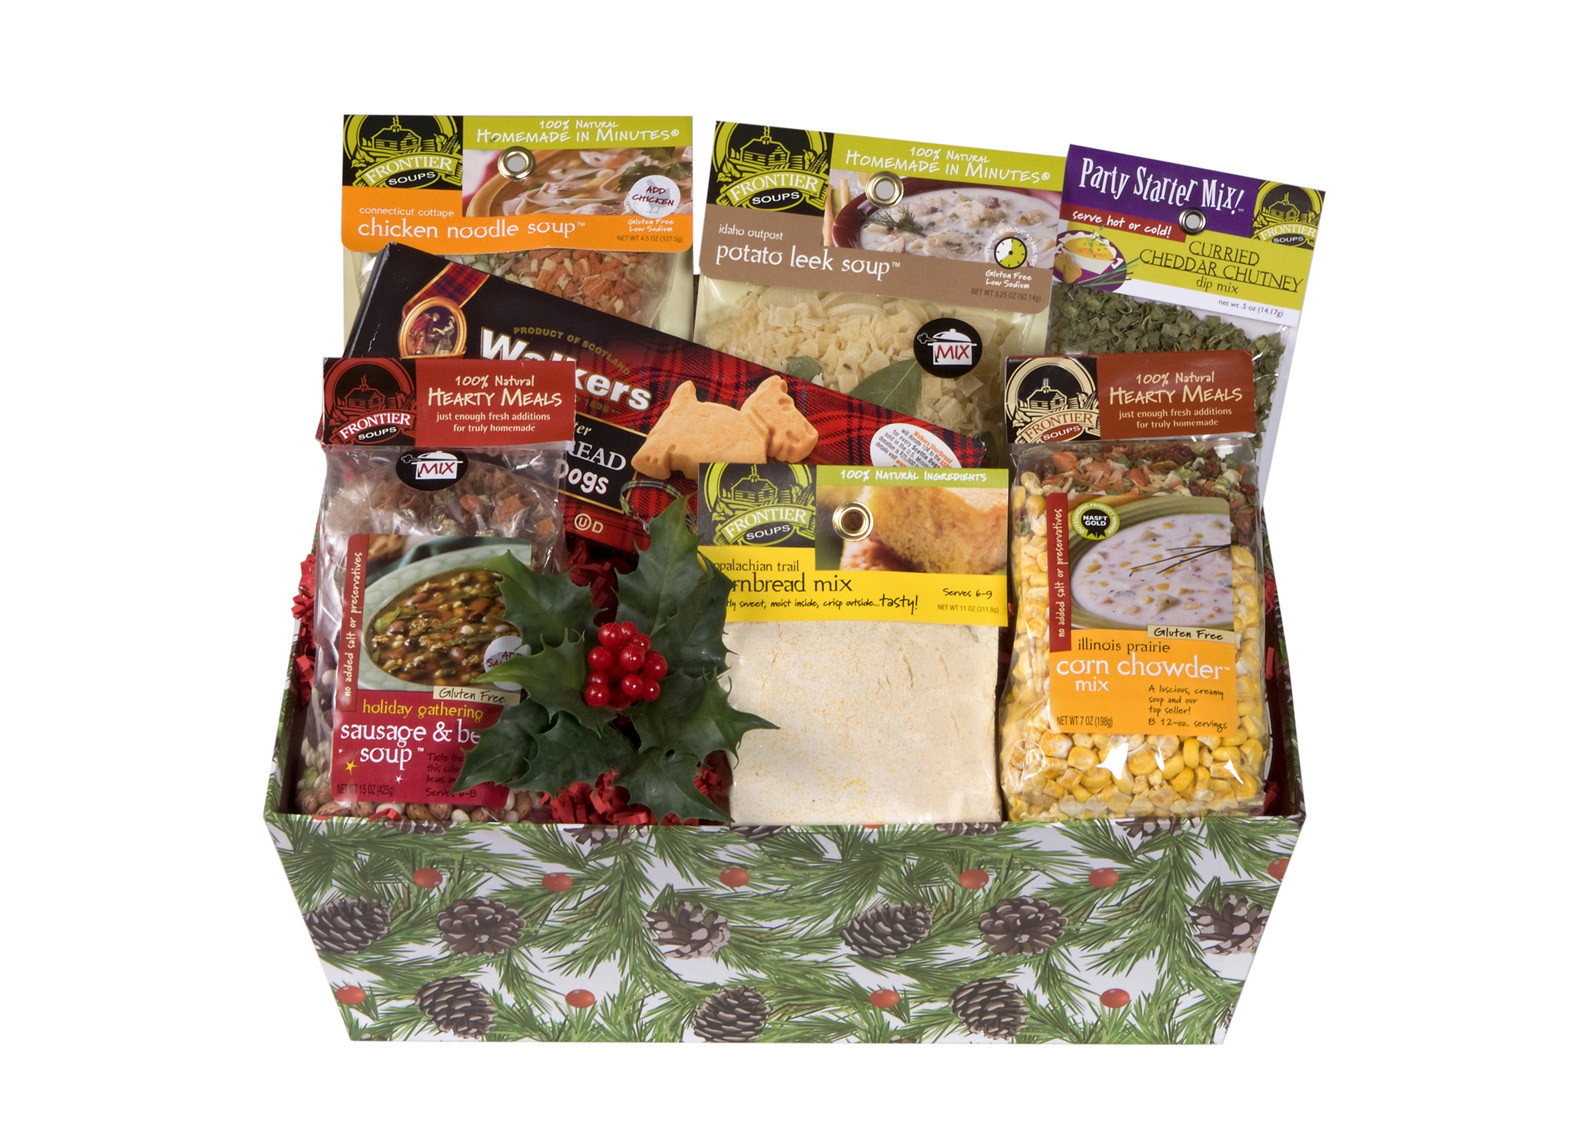 Top Tech Christmas Gifts 2020
 Frontier Soups Introduces New Healthy Holiday Gift Basket